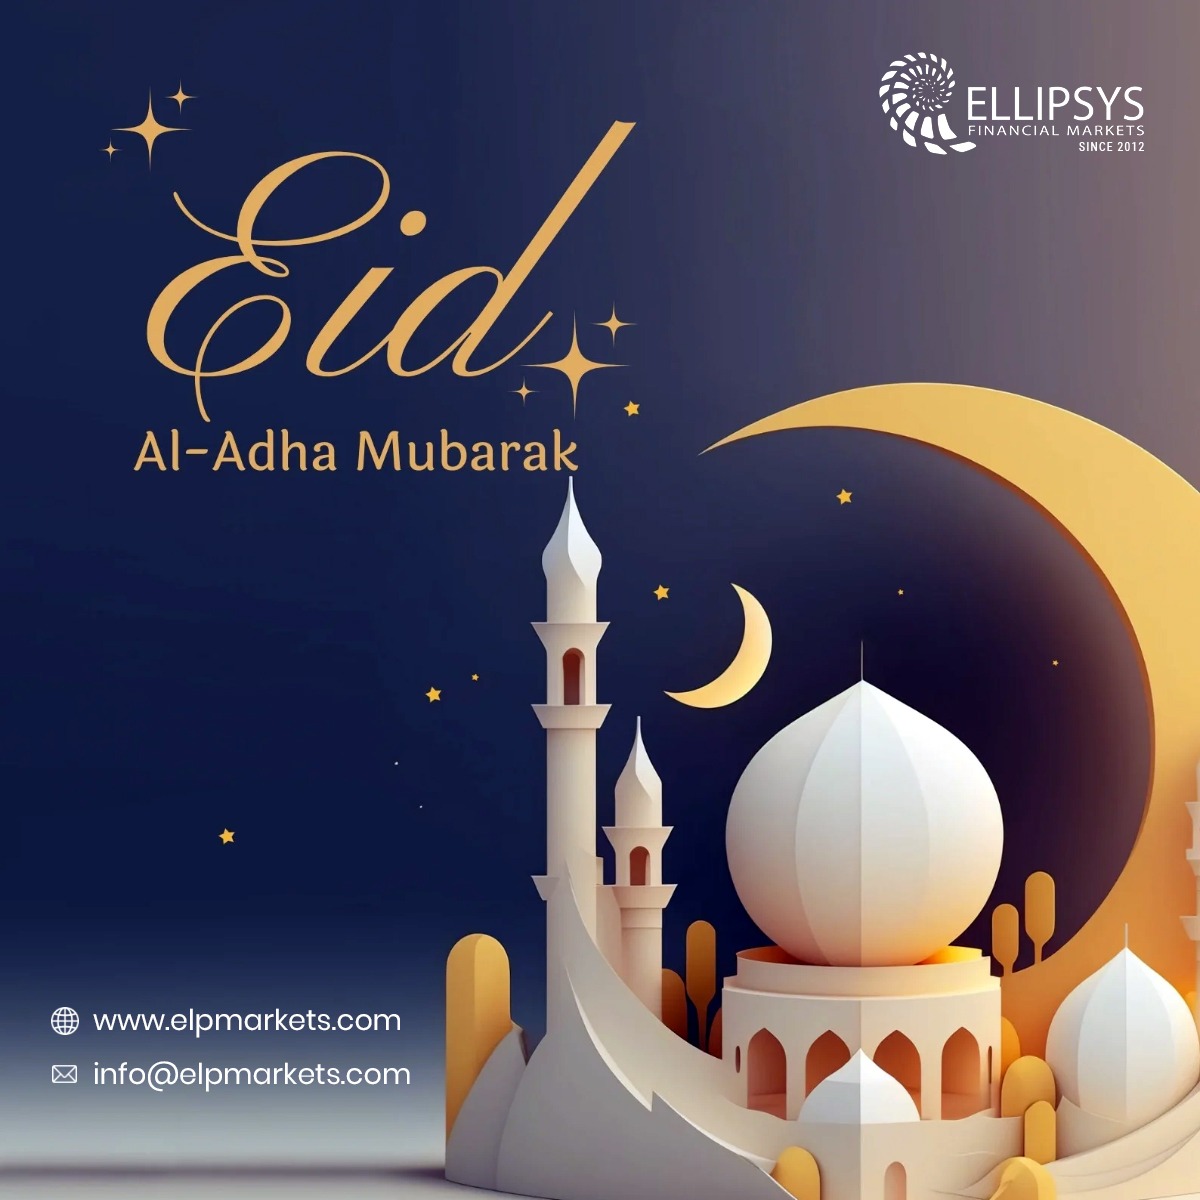 ✨As We Celebrate Eid Al Adha, We Wish You Achieve Success in Your Growth, Prosperity, and Many New Ventures.
'May this Eid bring happiness to your heart and your family'!🌙💫✨🕌

💐💐 Eid Al-adha Mubarak💐💐
 ❤️ 

#Eidaladha #eid #eidmubarak #eidaladha2023 #eidadha #EidAlAdha